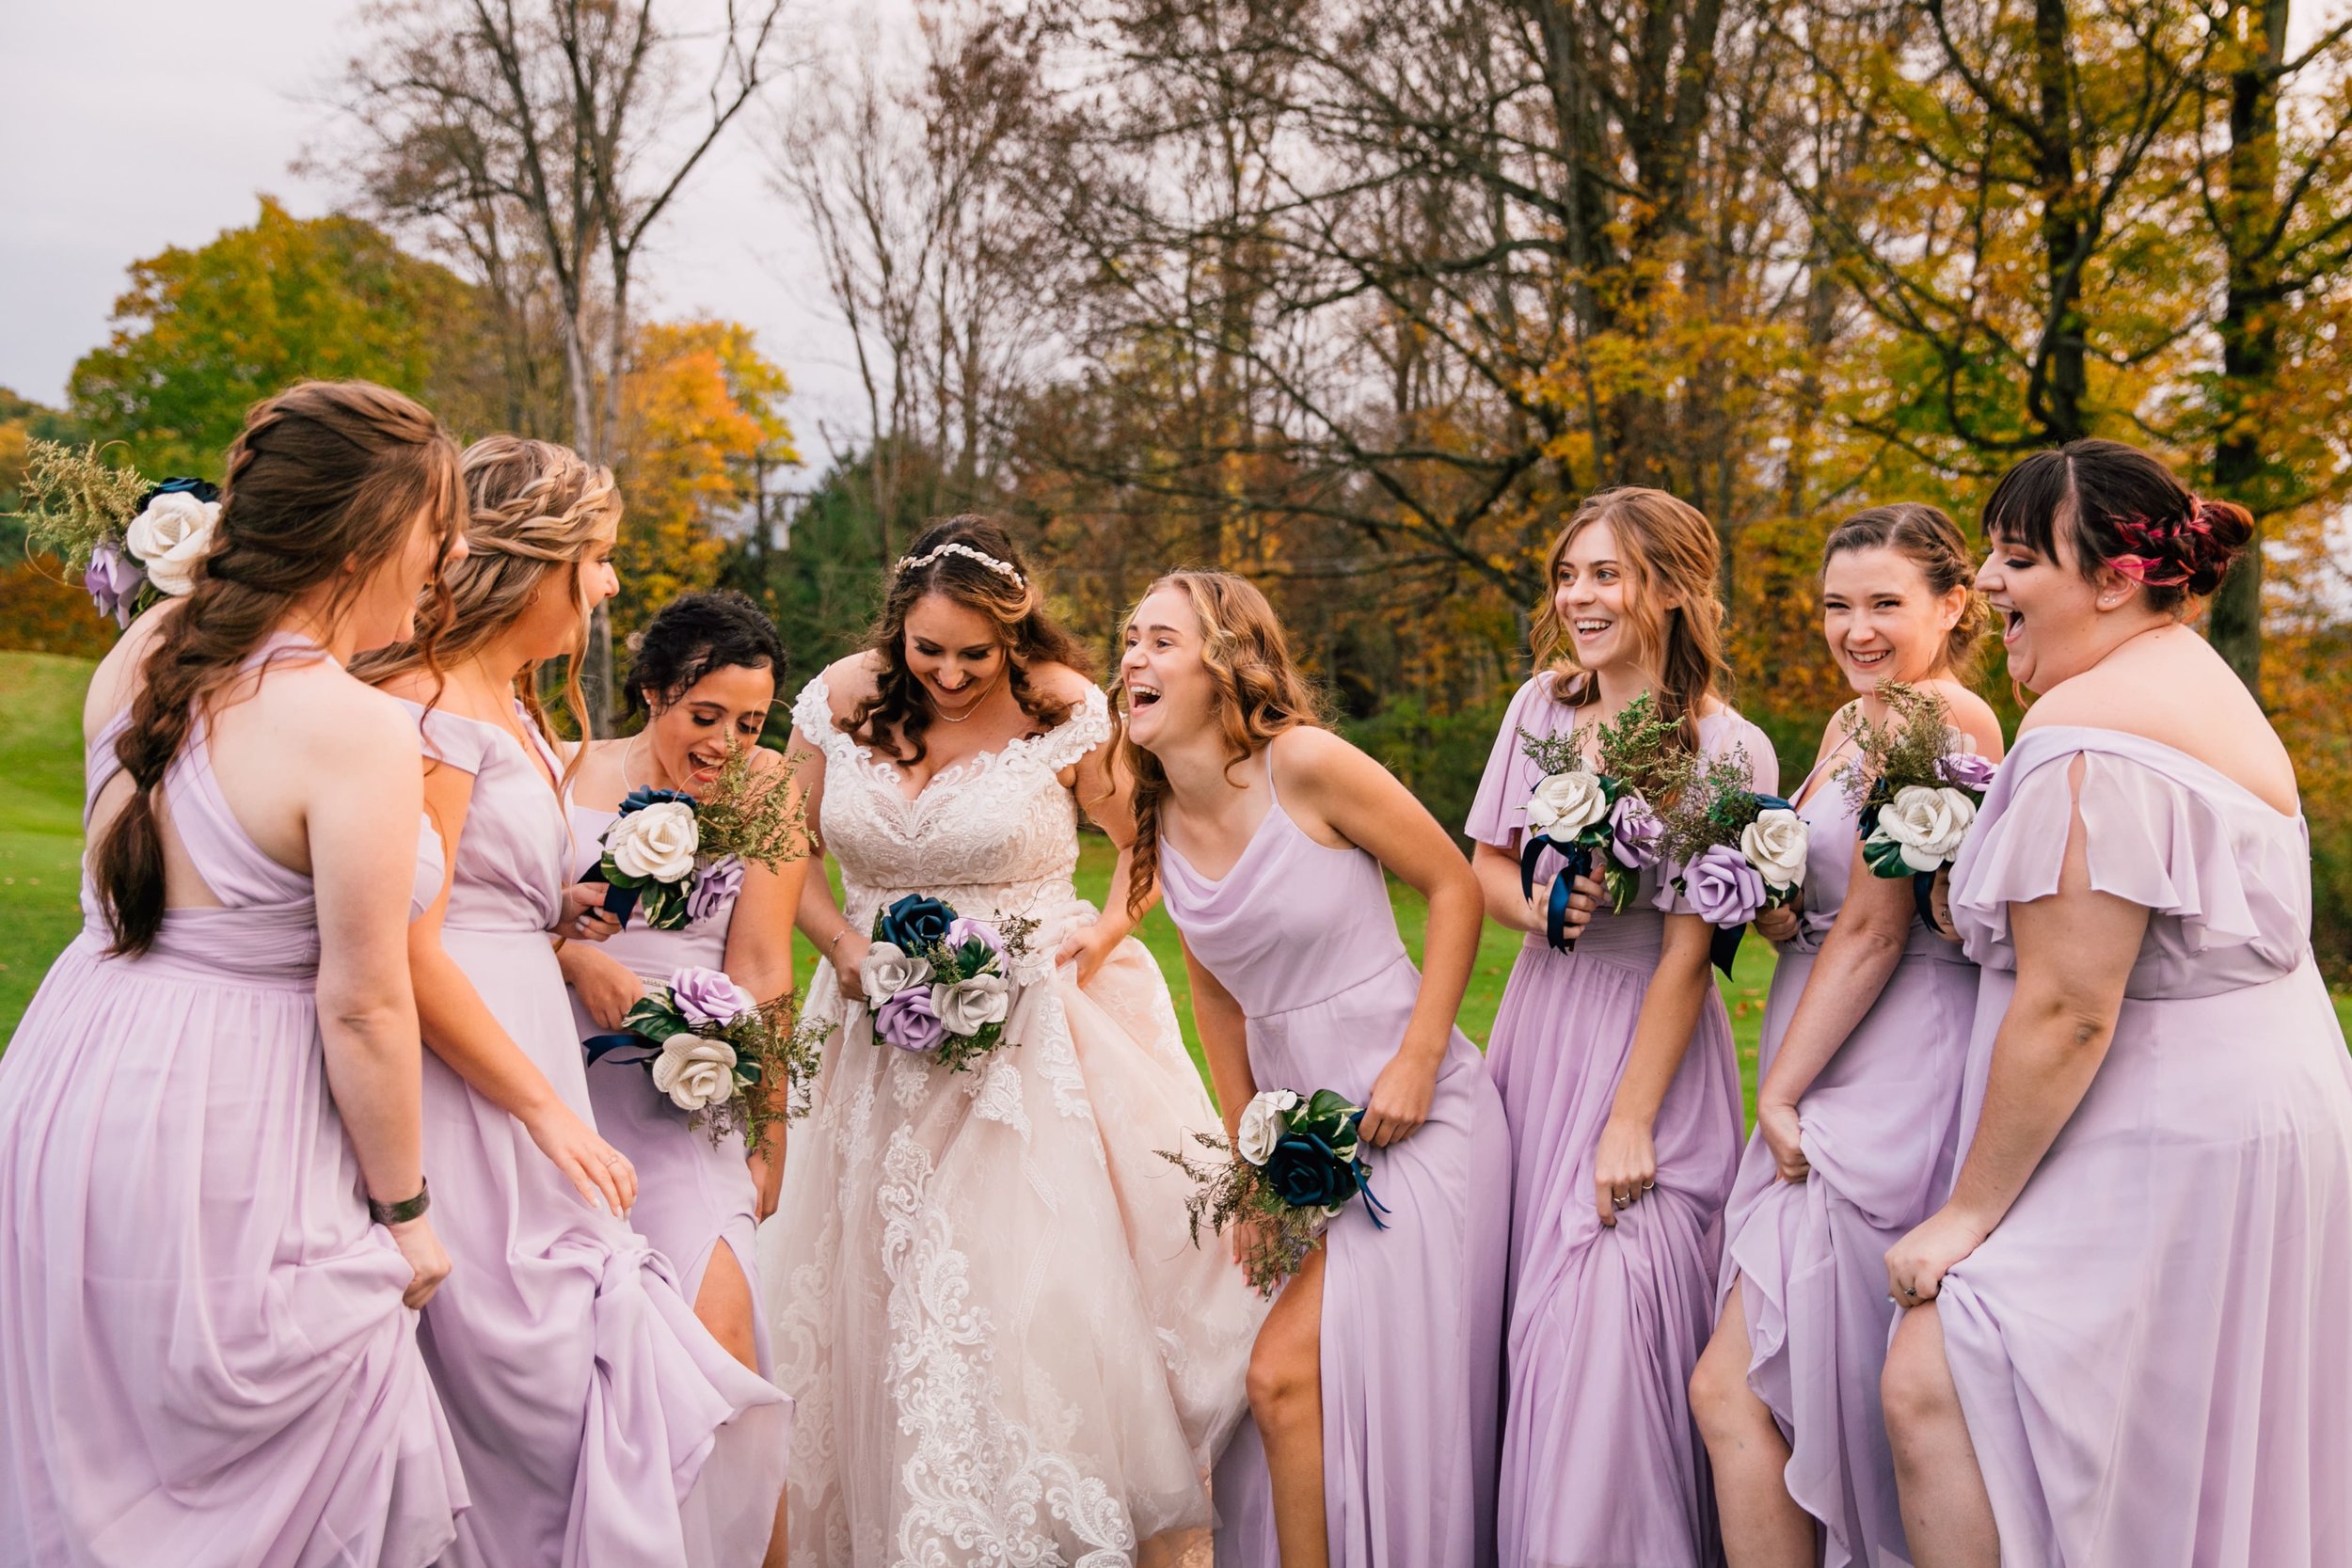  a wedding photographer captures the bride and bridesmaids laughing together at a fall wedding 